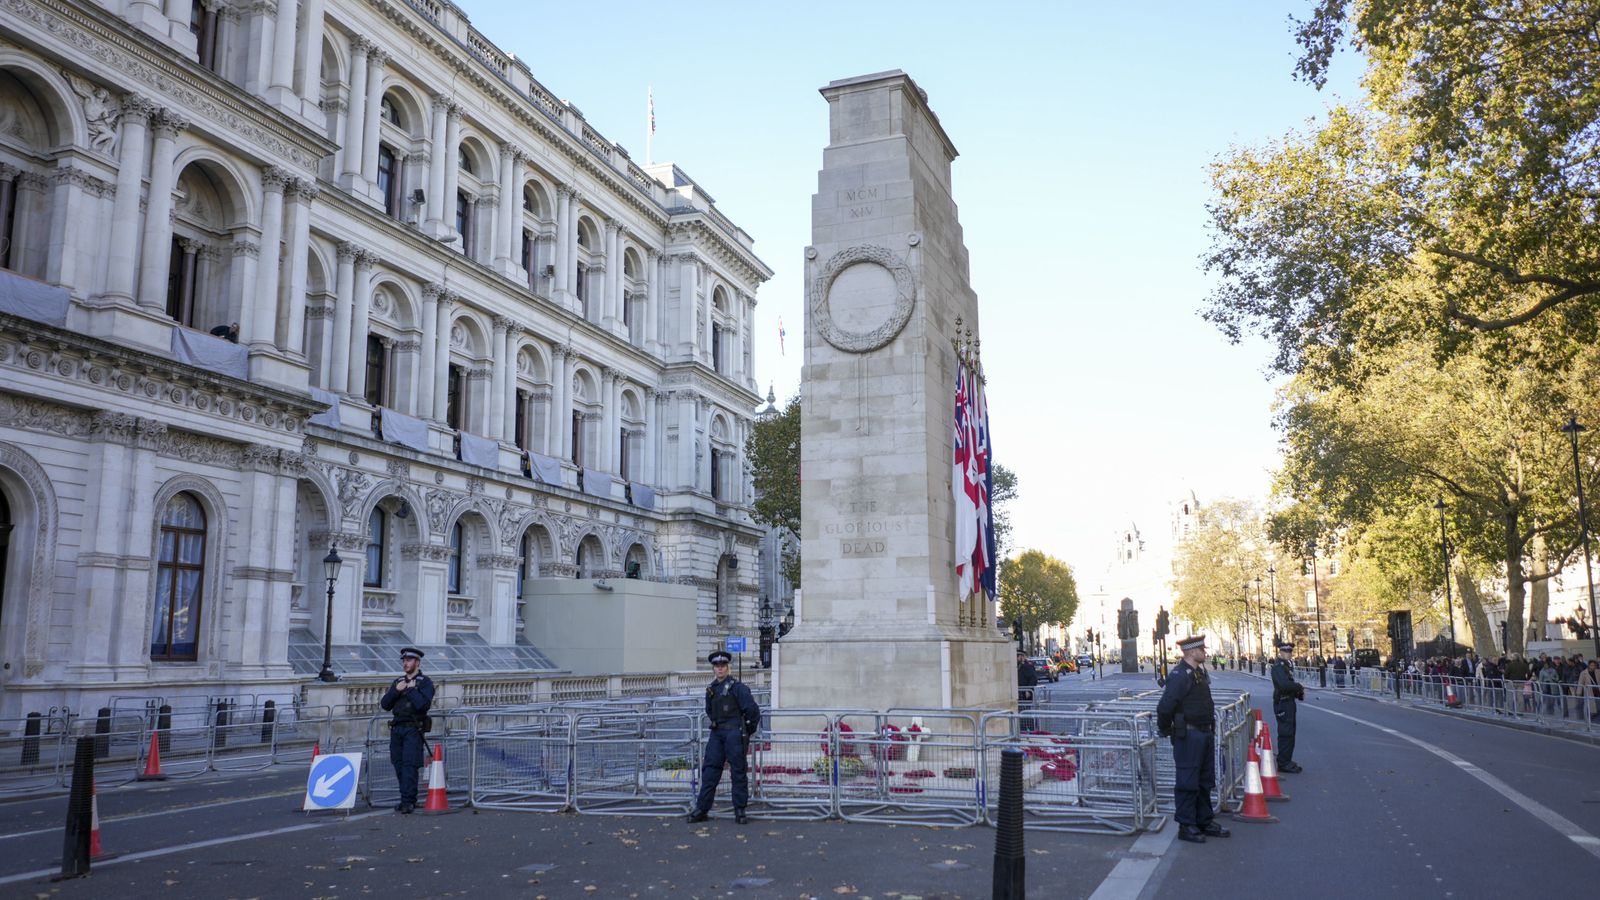 King to lead Remembrance Day service at Cenotaph hours after protests resulted in 126 arrests